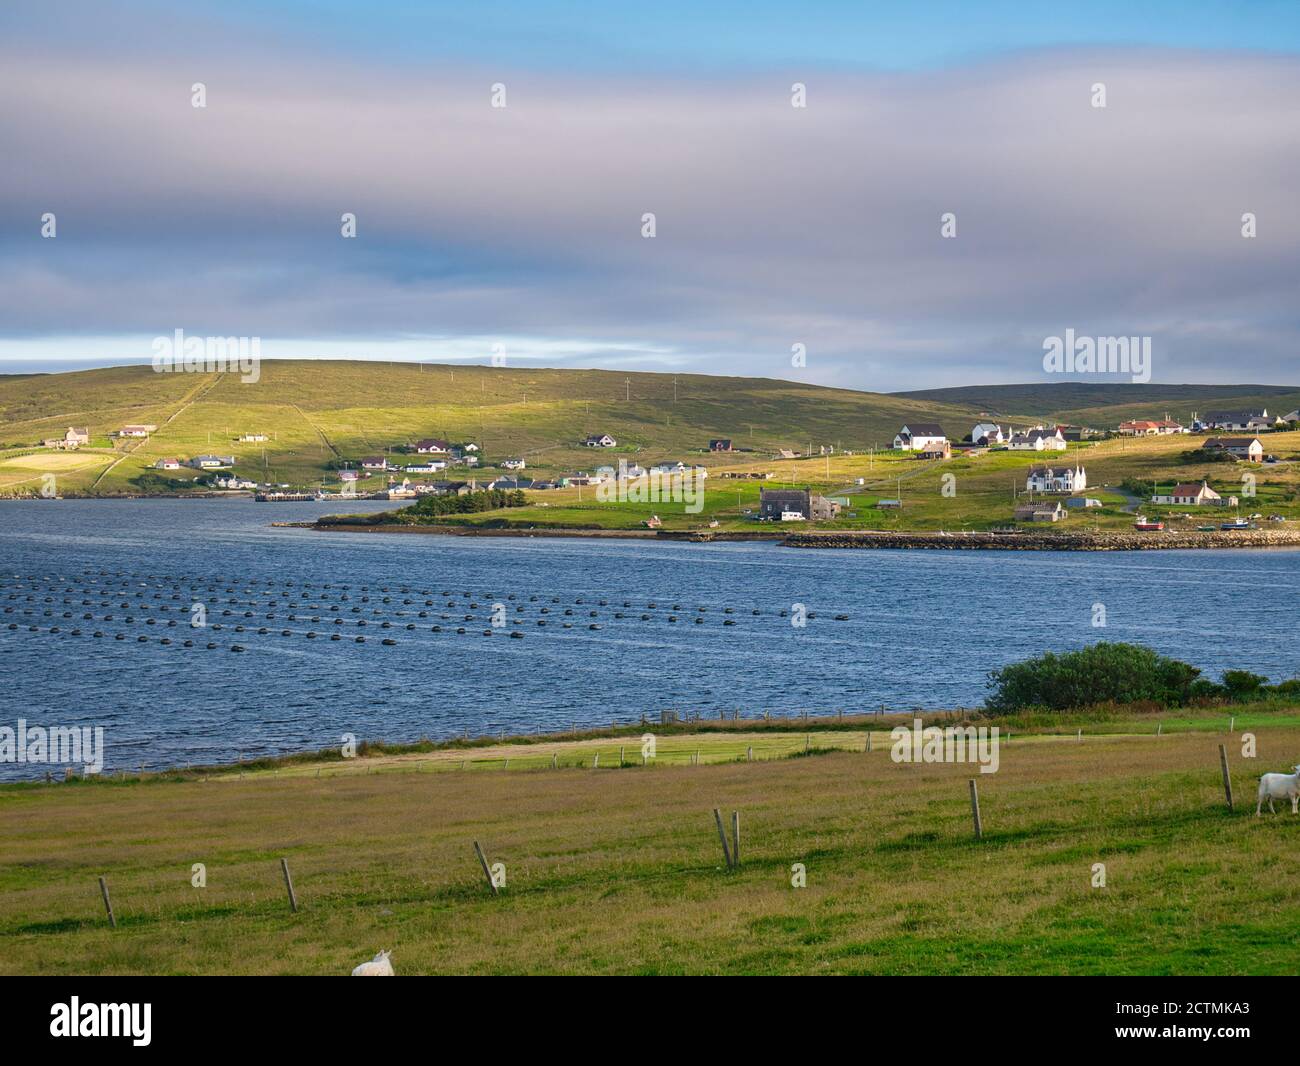 The remote community of Mid Yell on the island of Yell in Shetland, Scotland, UK - a rope-grown mussel farm appears in the foreground. Stock Photo